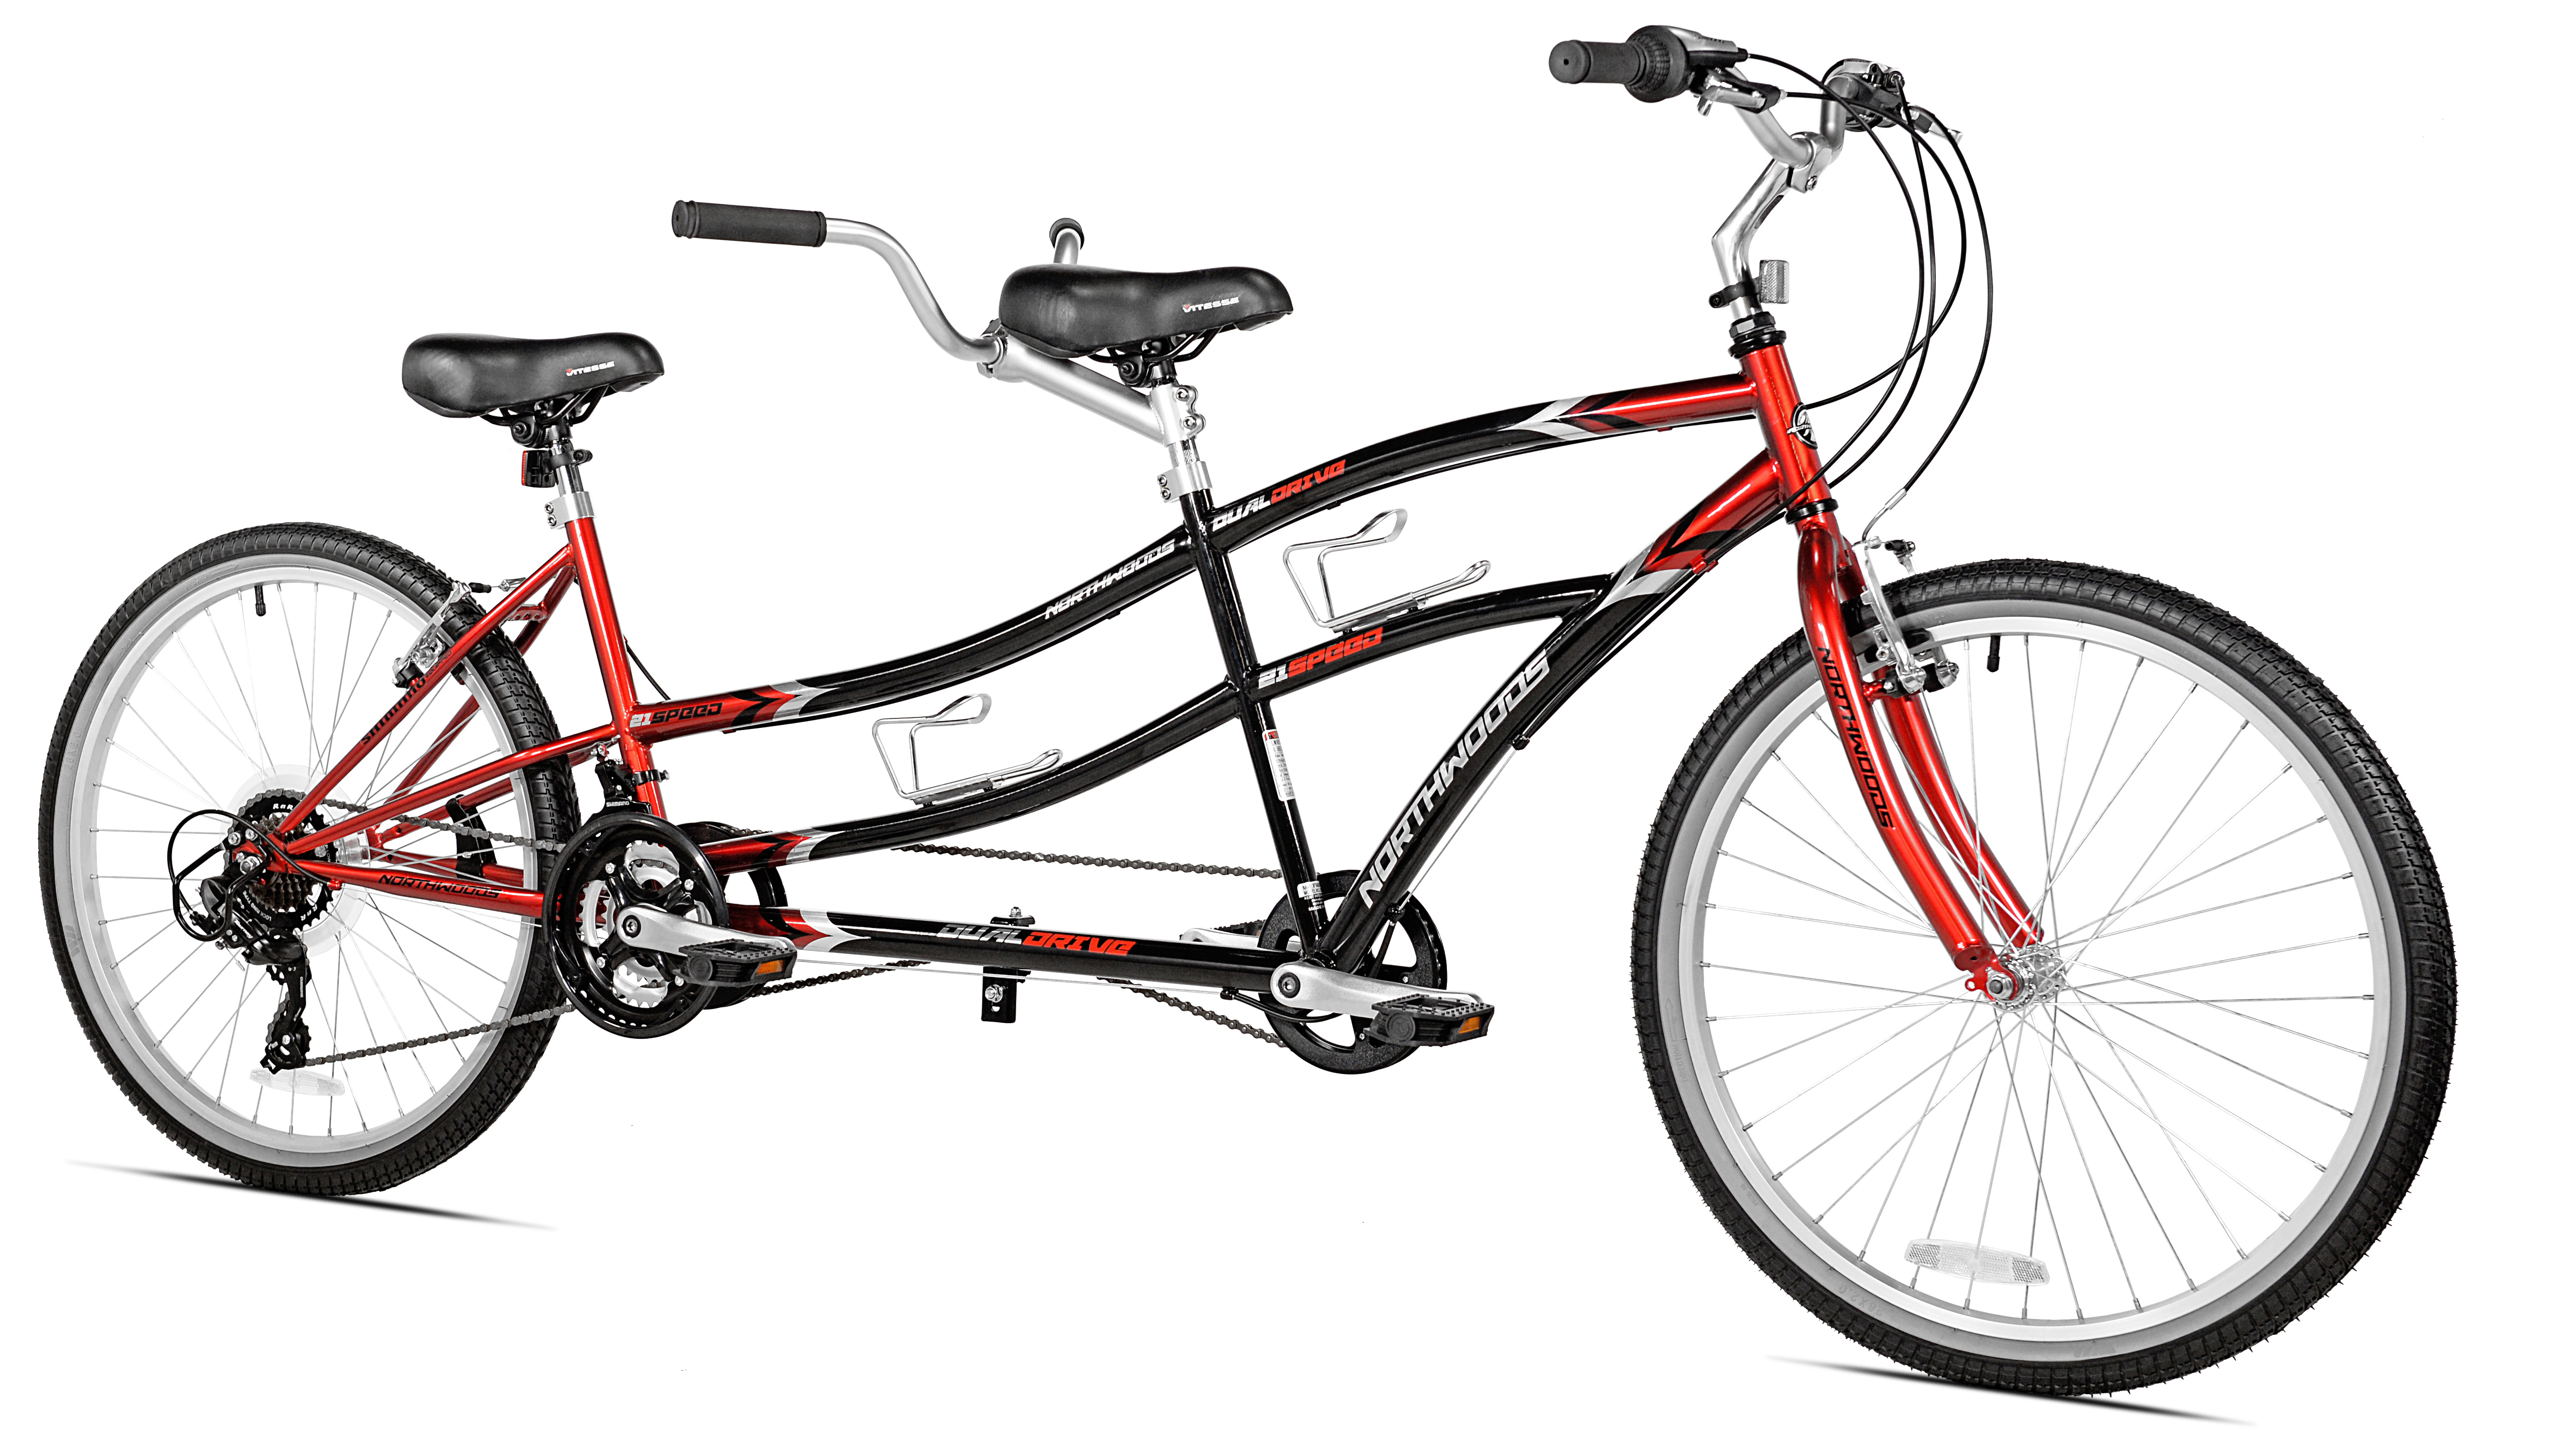 26 inch Northwoods 21-Speed Dual Drive Tandem Bike with Revo Twist Shifters, Reliable Alloy